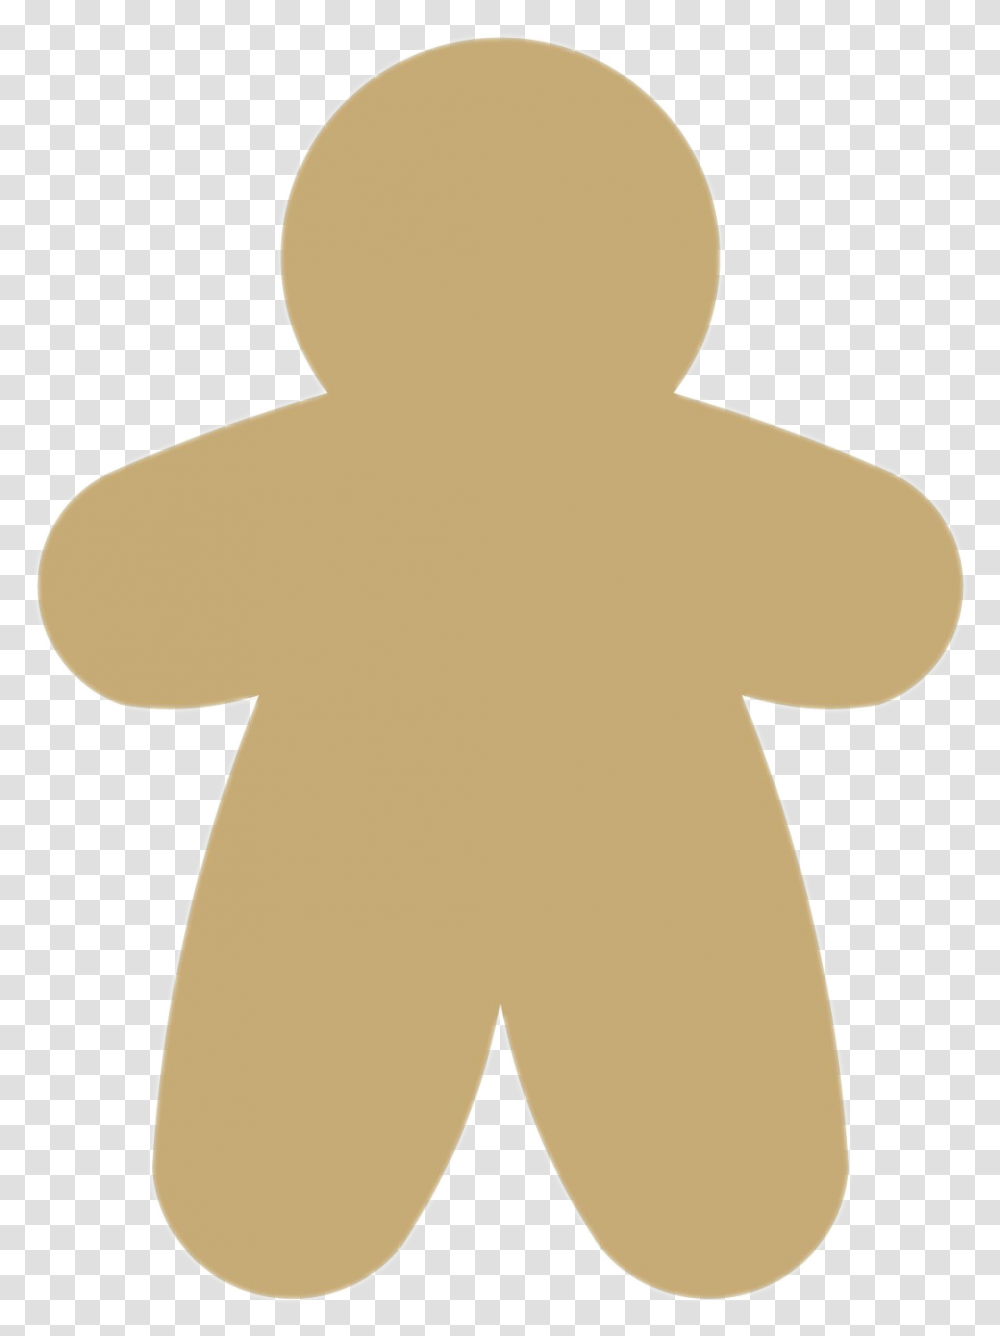 Gingerbread Man High Quality Image Gingerbread Man, Cookie, Food, Biscuit Transparent Png